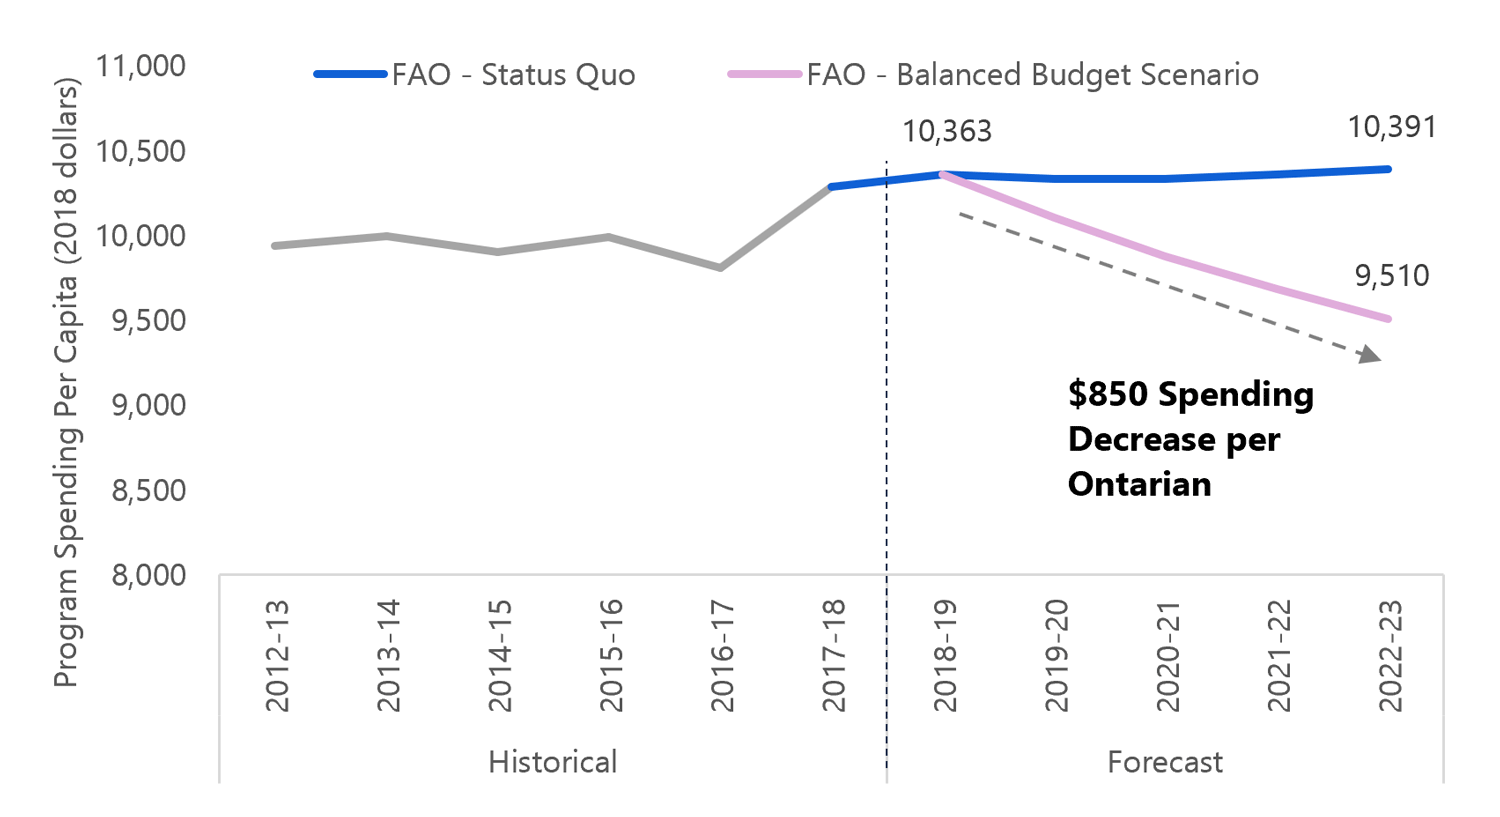 Balancing the Budget Without Raising Revenue Would Require Spending $850 Less Per Ontarian